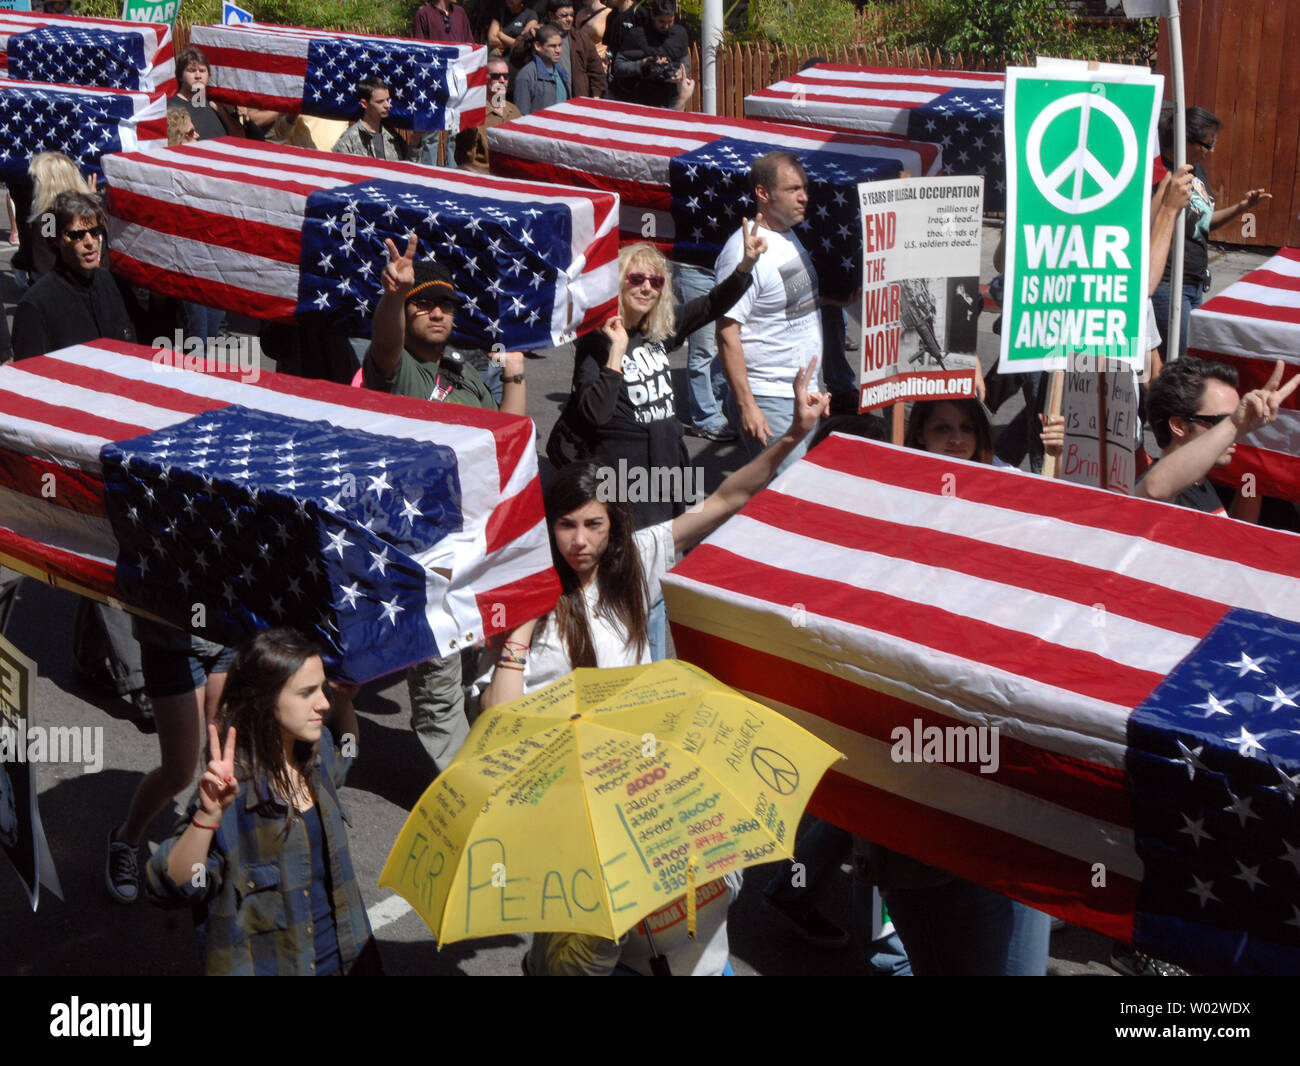 Anti-war demonstrators march through the streets of Hollywood in Los Angeles on March 15, 2008. Thousands of people protested the war in Iraq during a demonstration to mark the fifth anniversary of the U.S.-led invasion in Iraq.  (UPI Photo/Jim Ruymen) Stock Photo